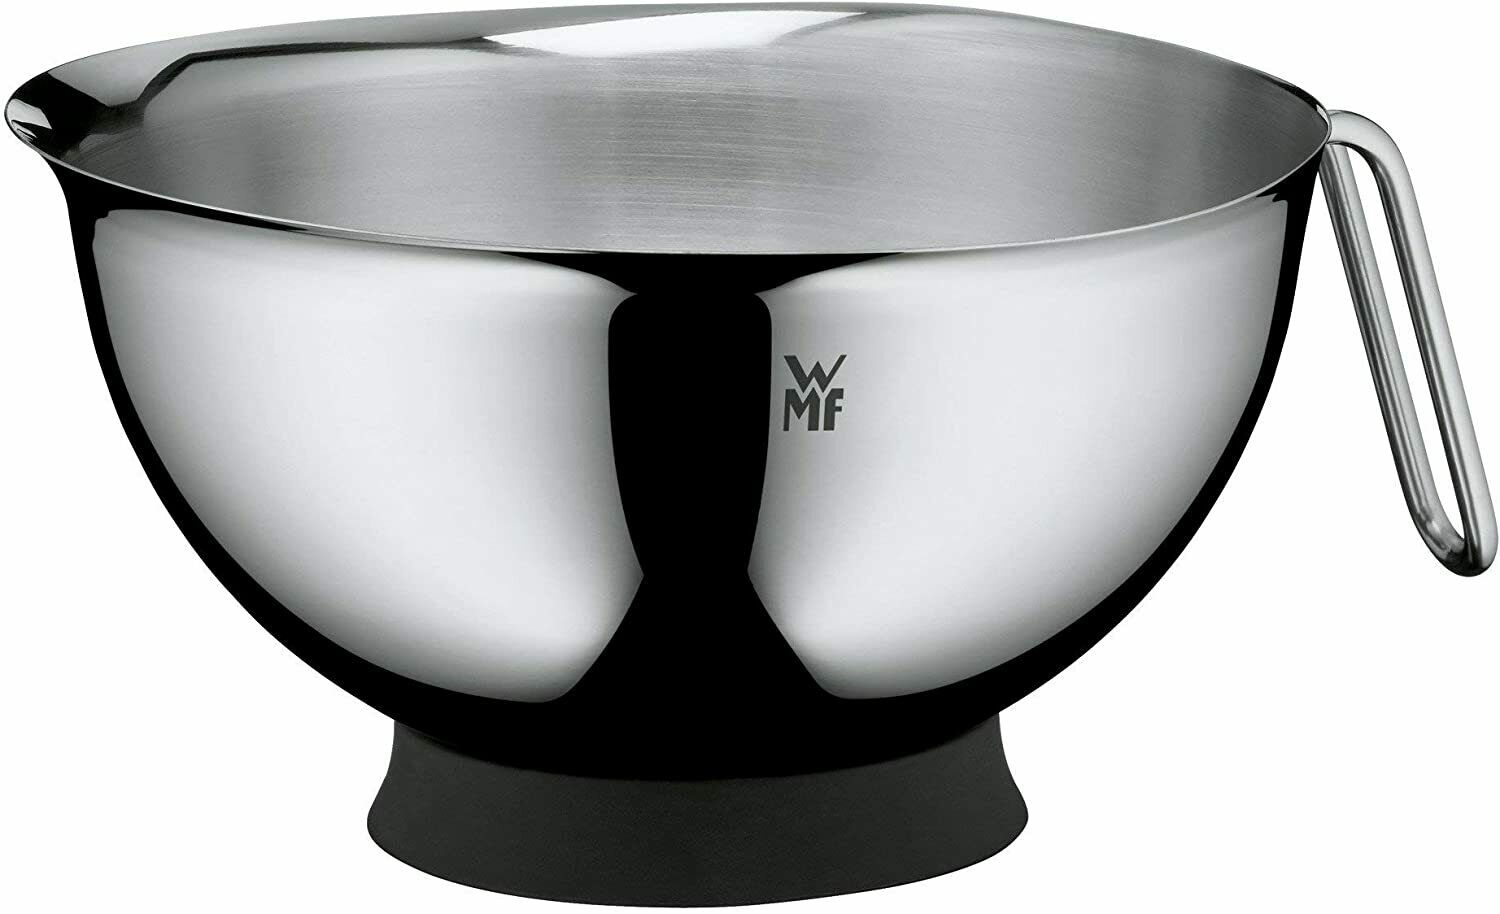 WMF 645656030 Mixing Bowl + stable stand in stainless steel Ø20cm x12cm:H 2020